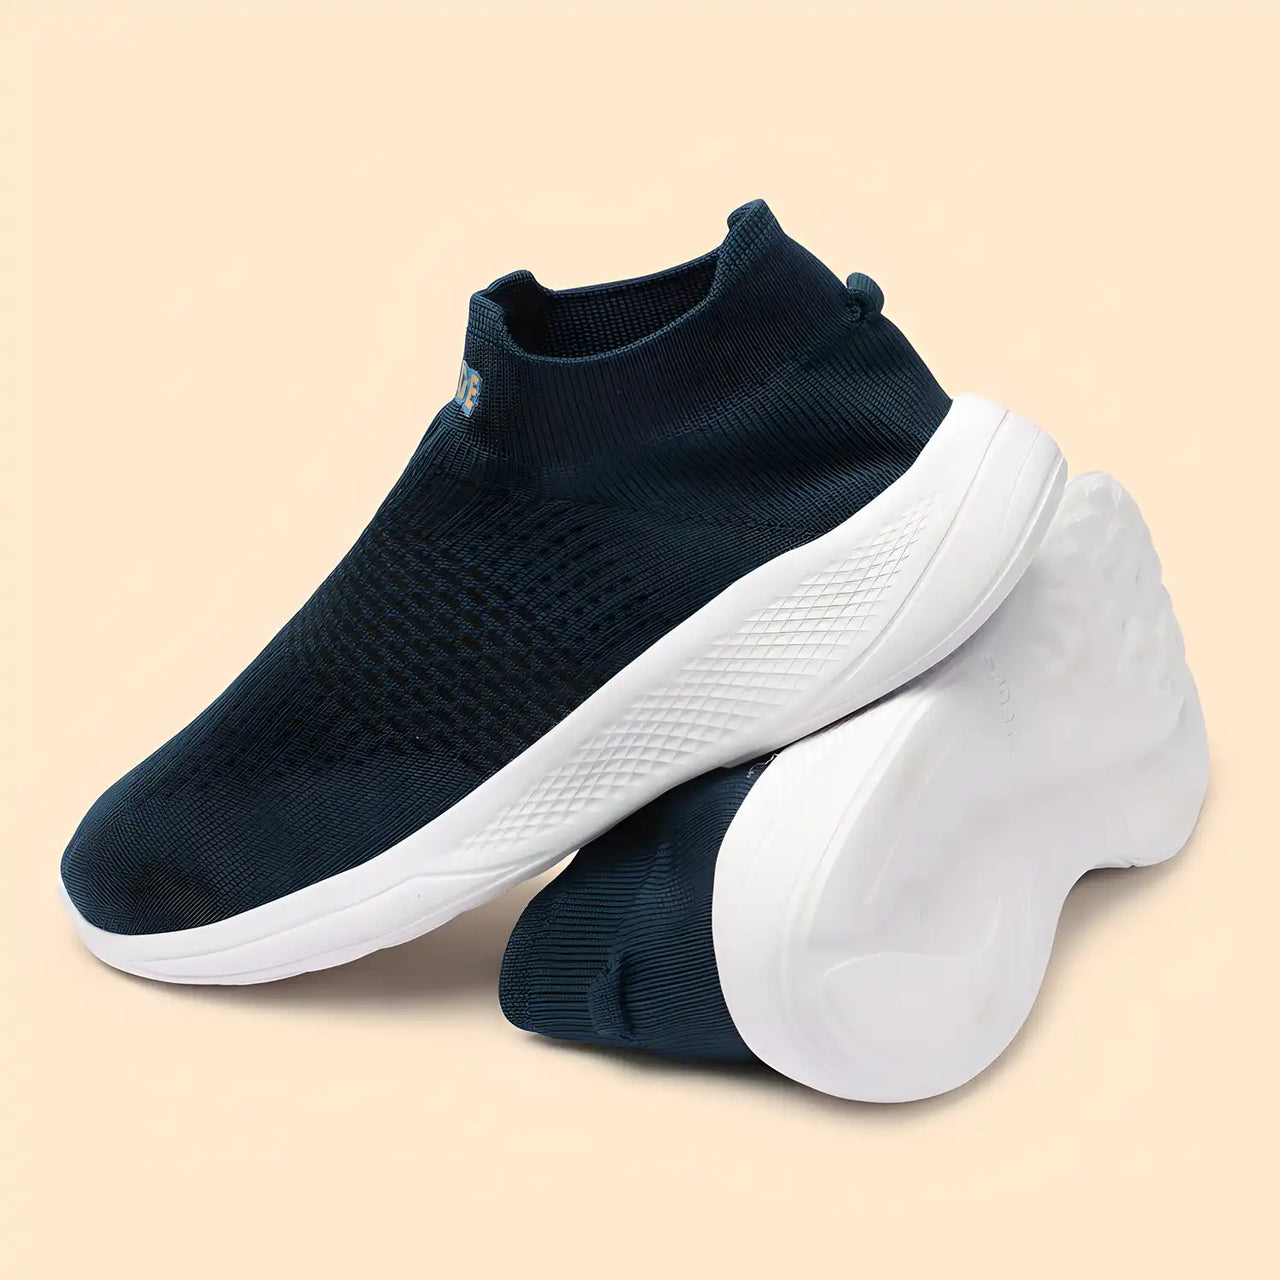 Mens's Sports Running Shoes